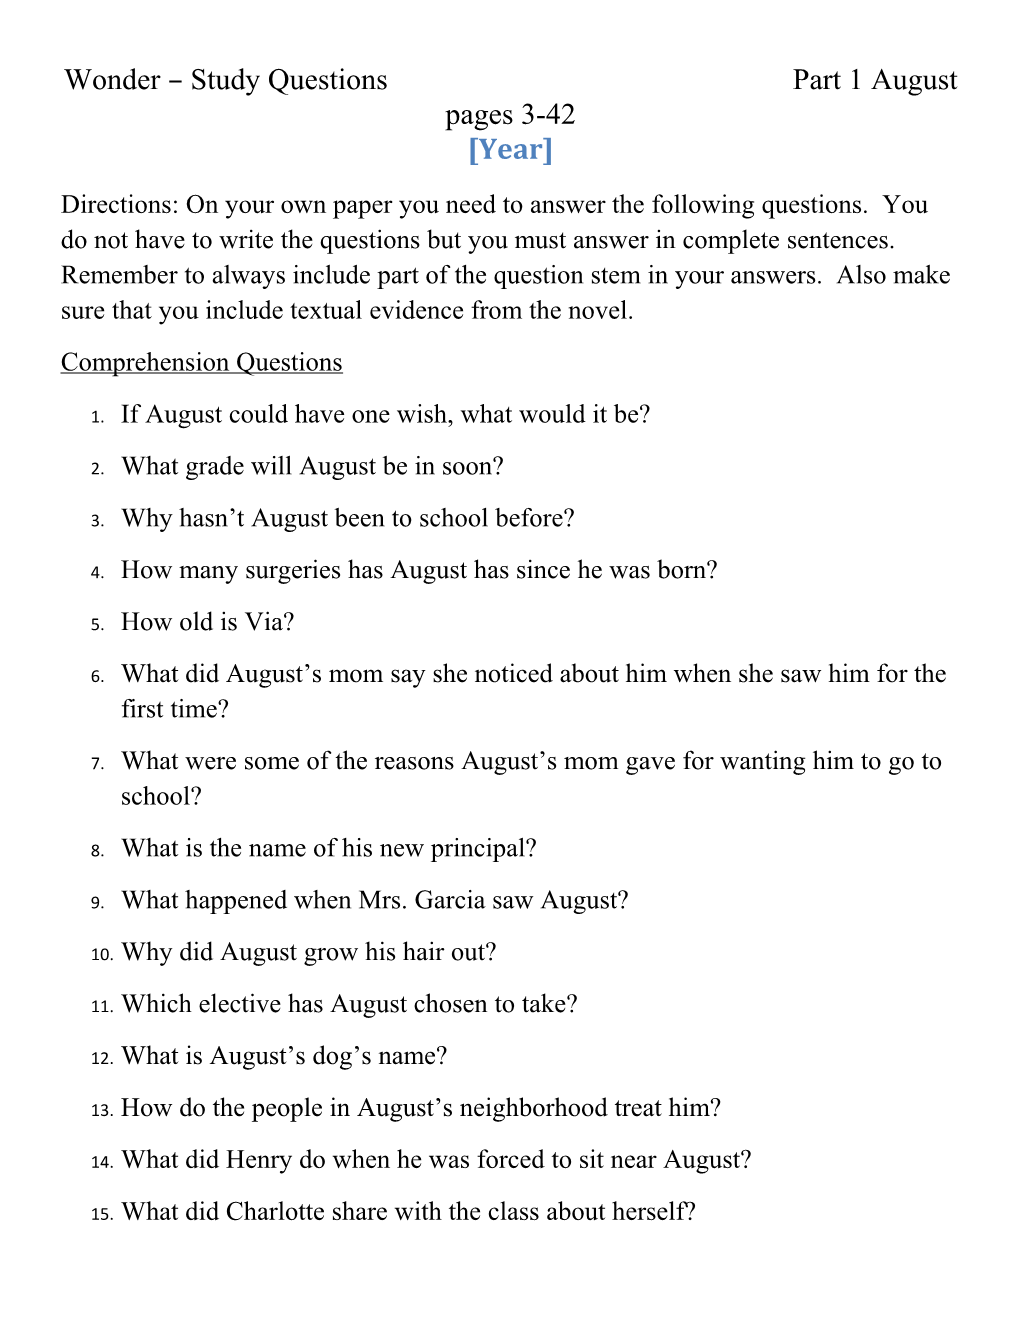 Wonder – Study Questions Part 1 August Pages 3-42